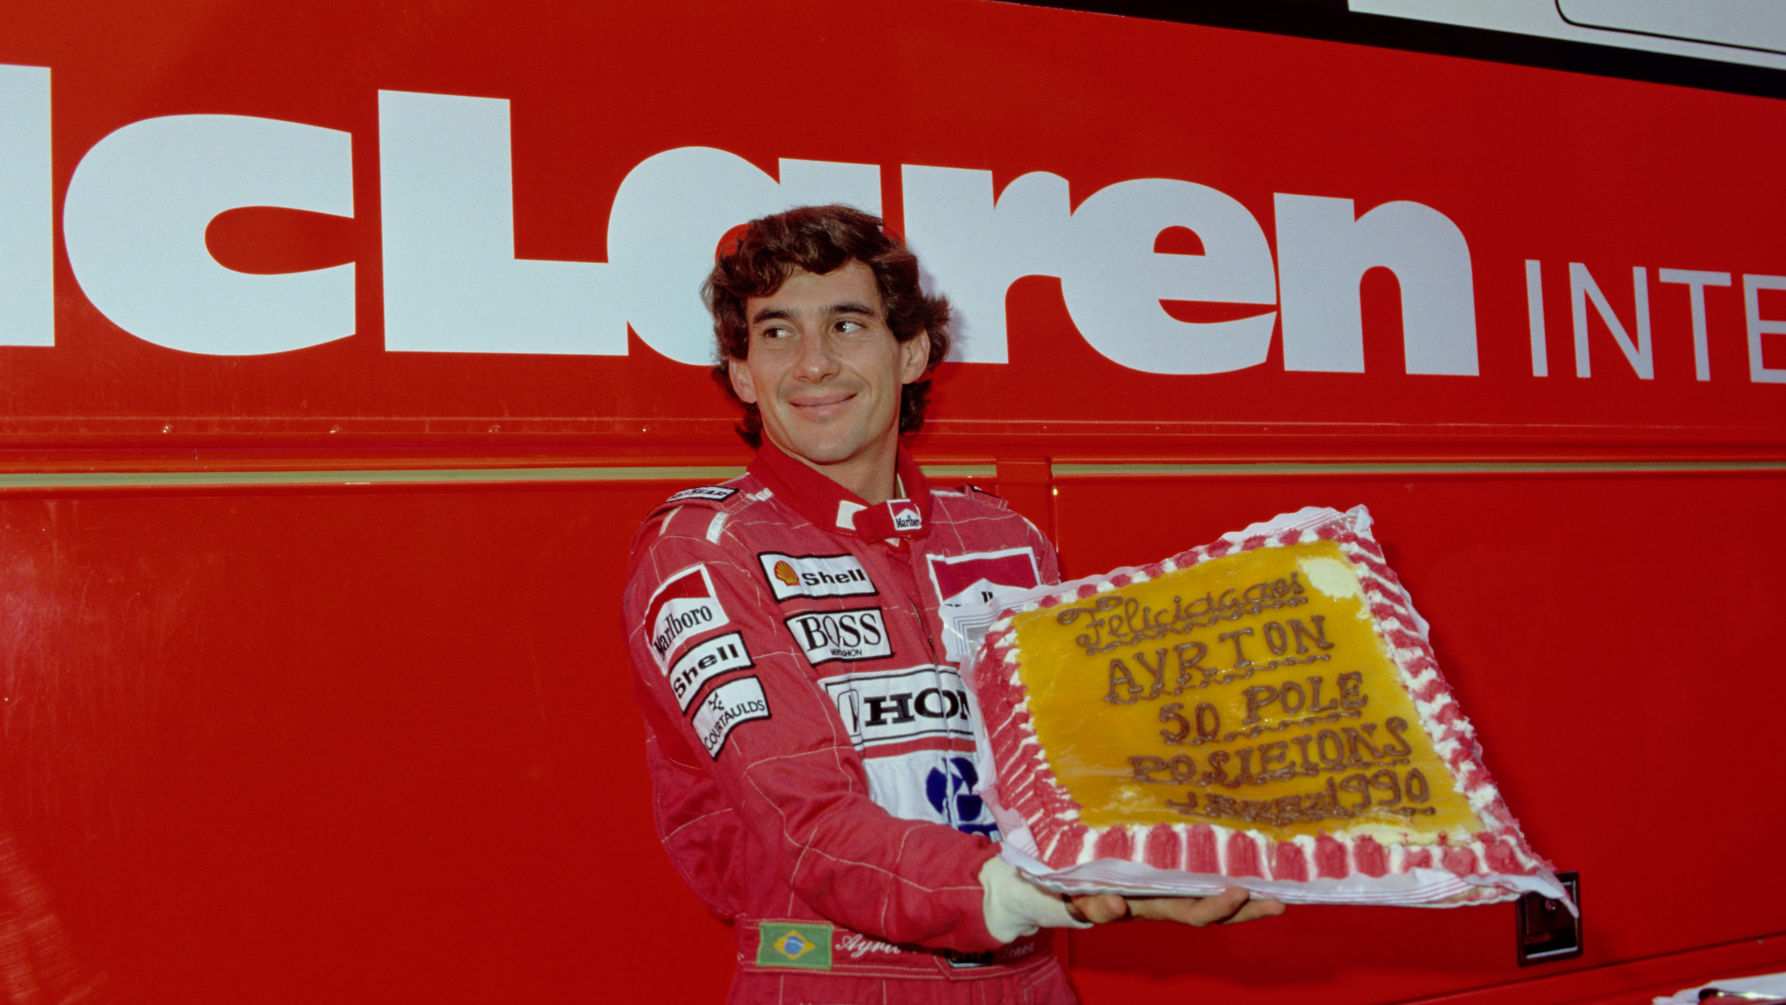 1990 - Ayrton secured the 50th pole position of his career at the Spanish Grand Prix. Photographer Credit Norio Koike